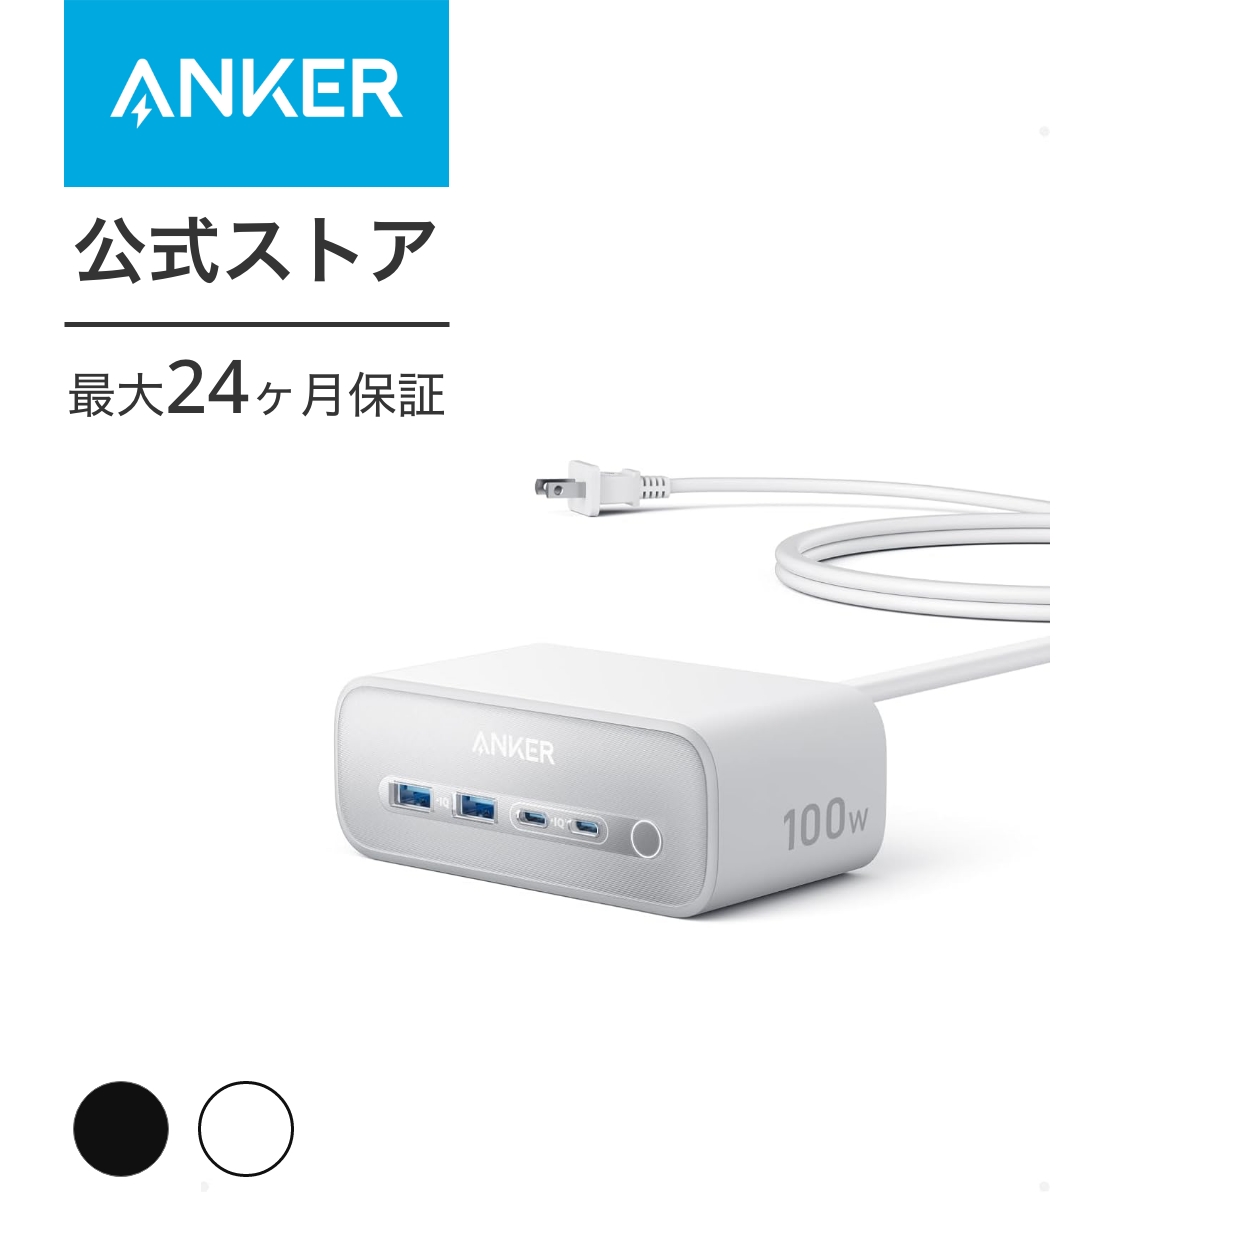 Anker Anker Charging Station（7-in-1 100W）A91C4Nx1 3個口 1.5m OA、電源タップの商品画像